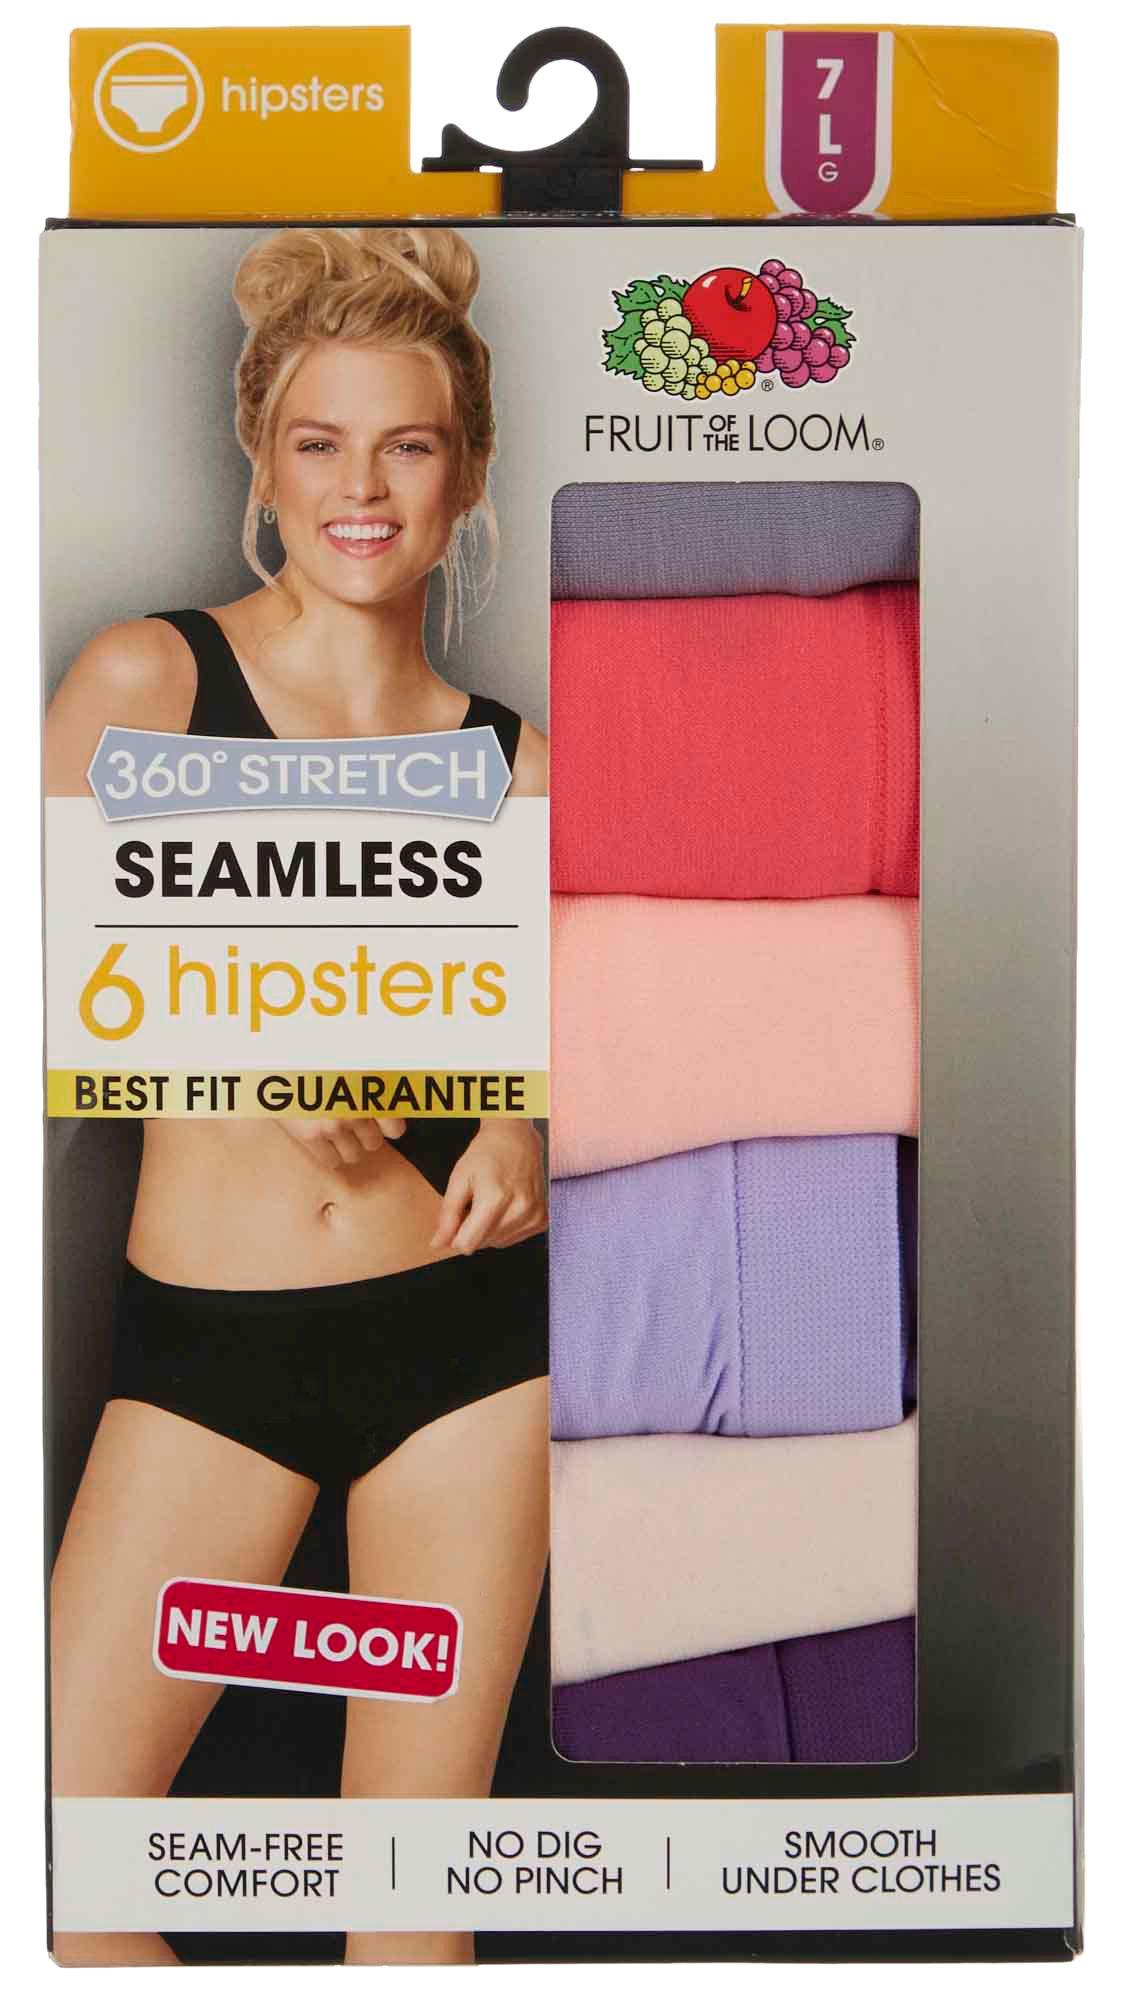 Fruit of the Loom Stitch Panties for Women